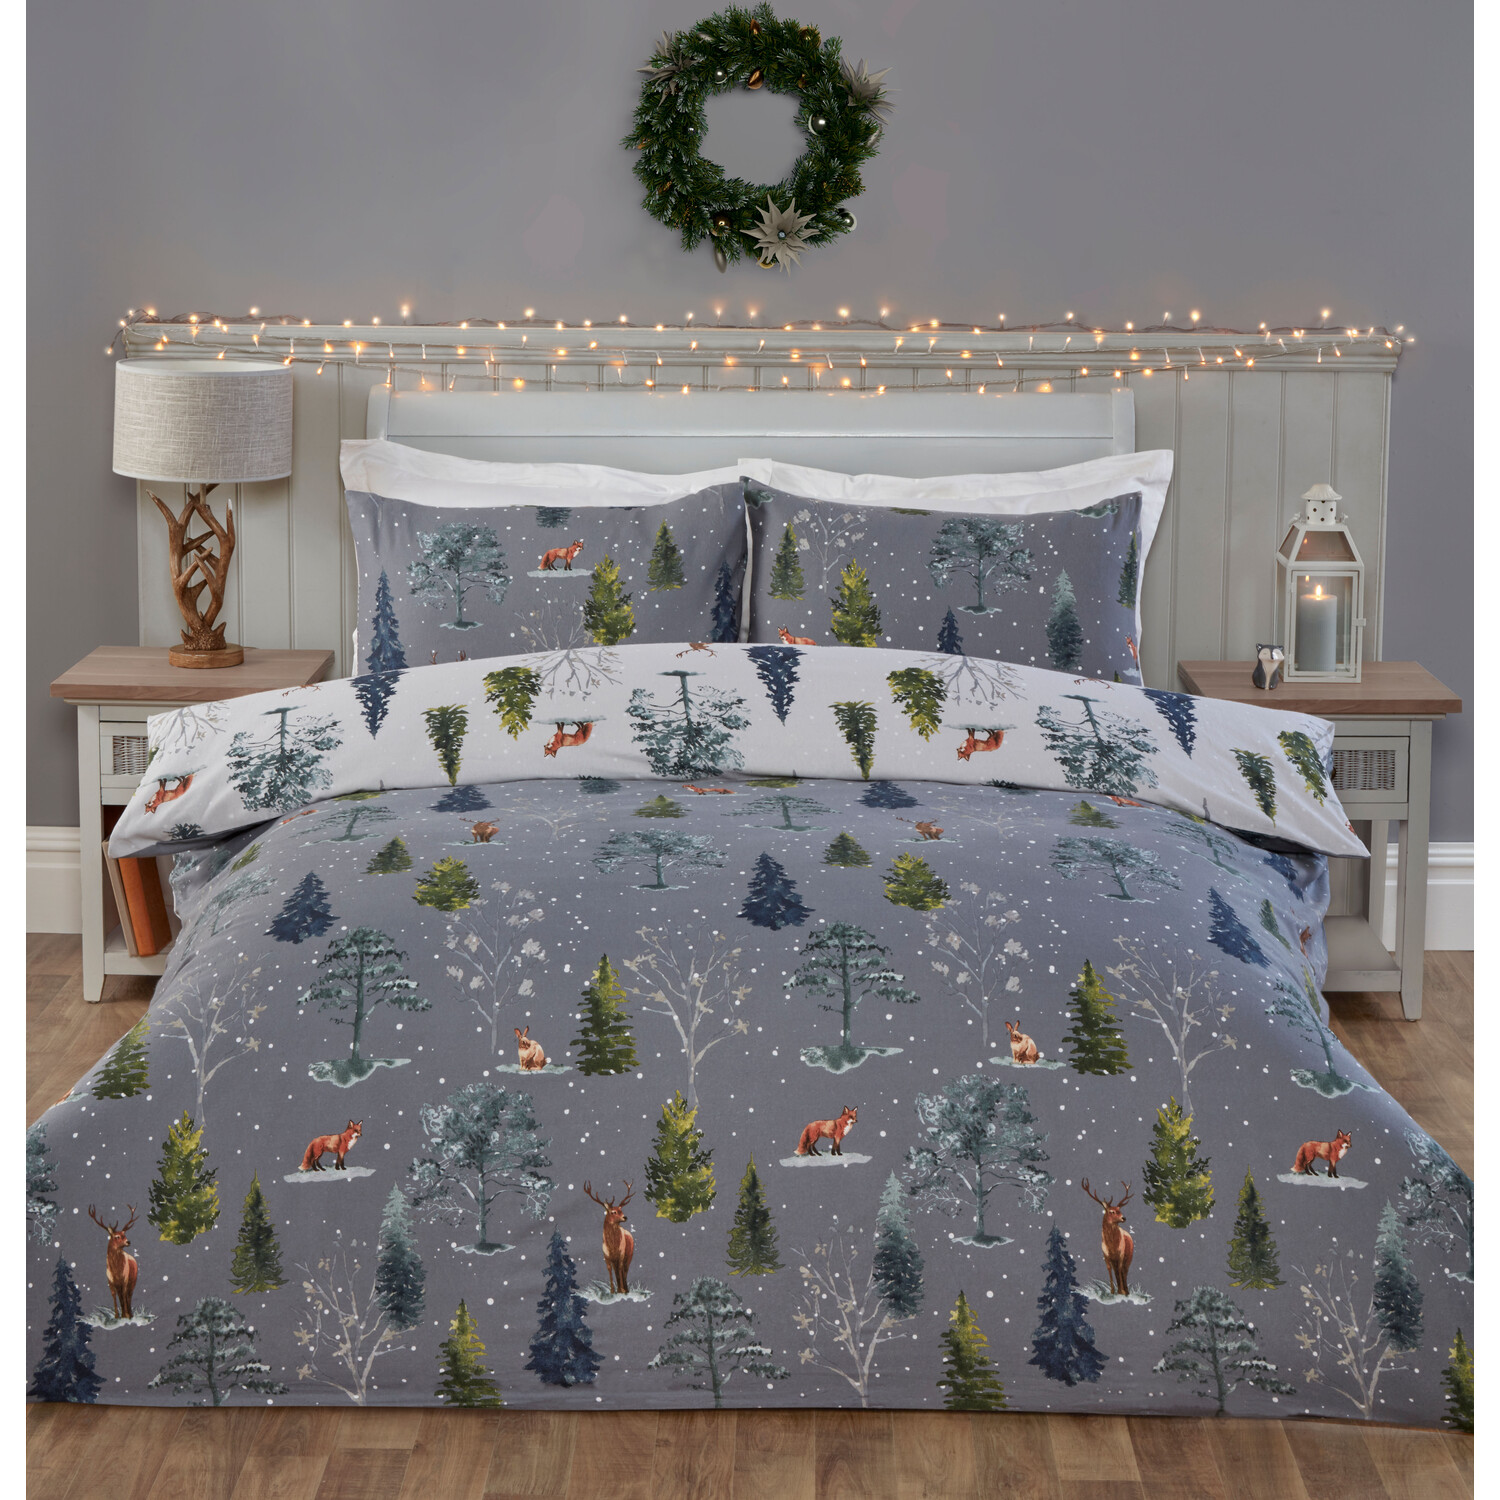 Snowy Forest Duvet Cover and Pillowcase Set - Grey / Superking Image 1